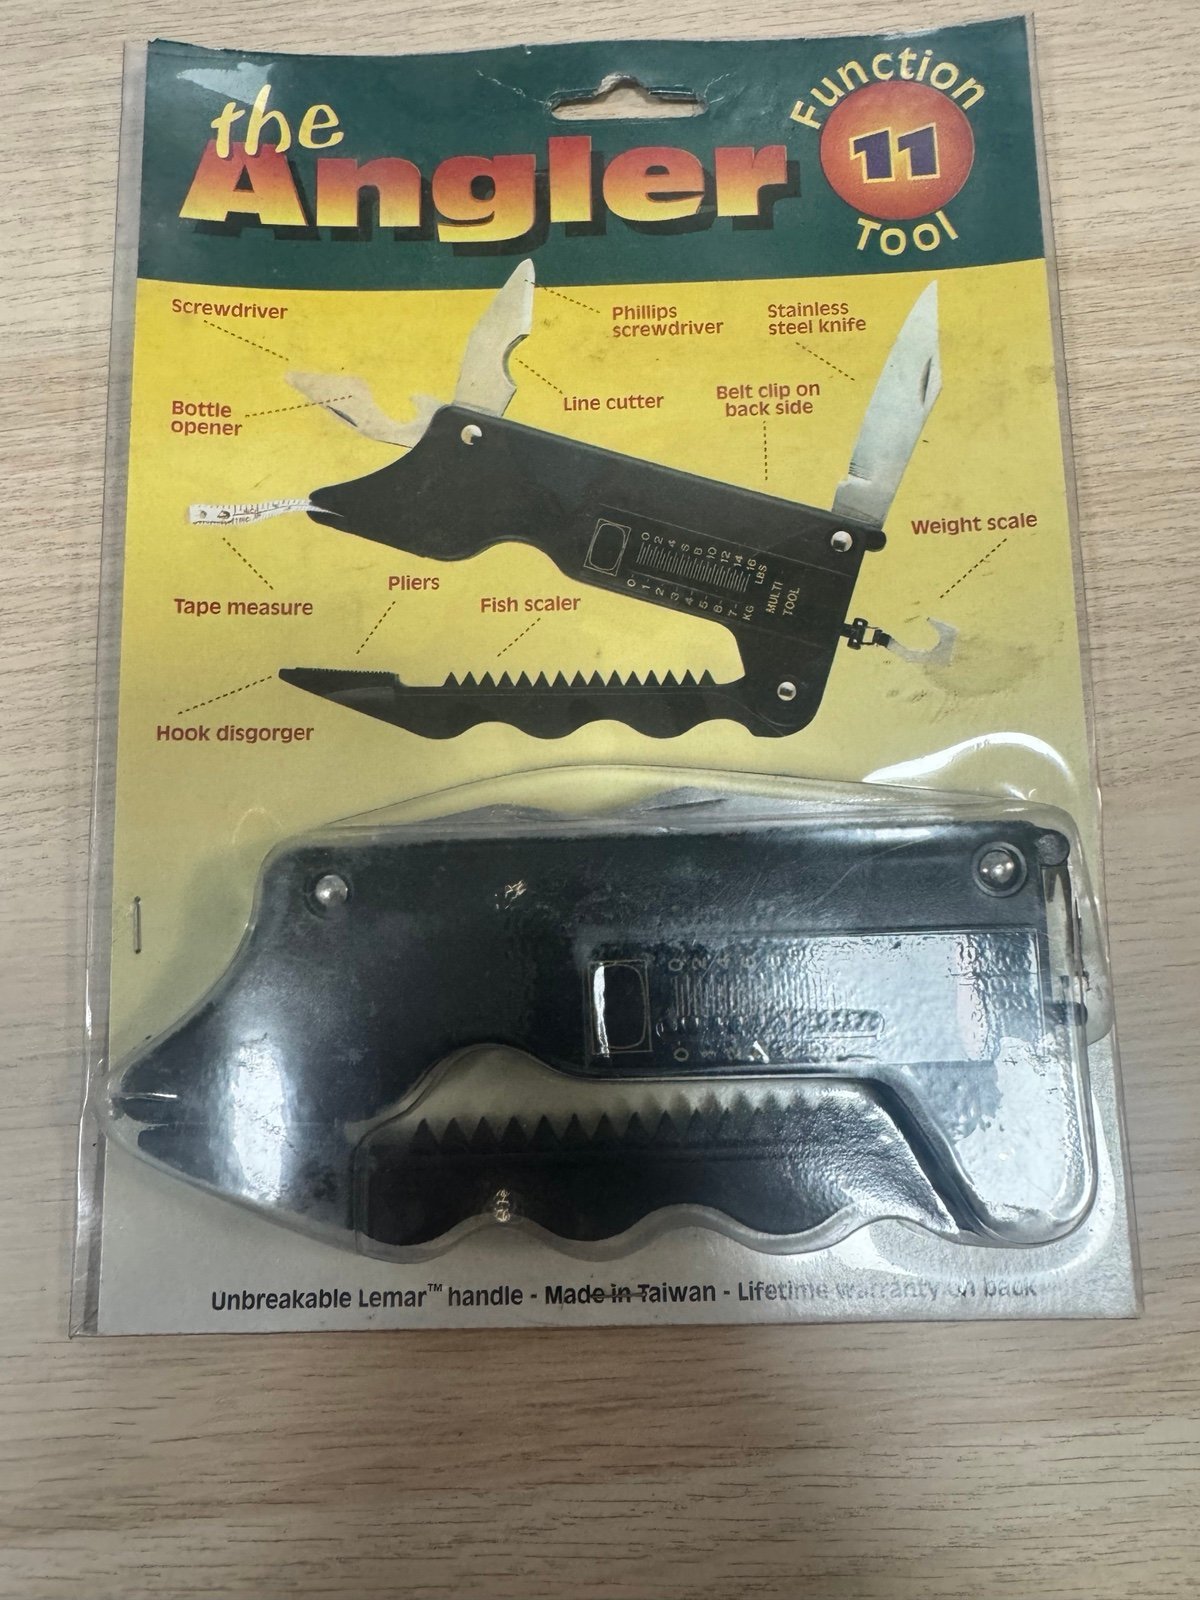 The Angler 11 Function Fishing Multi Tool - NOS cFtKT0f